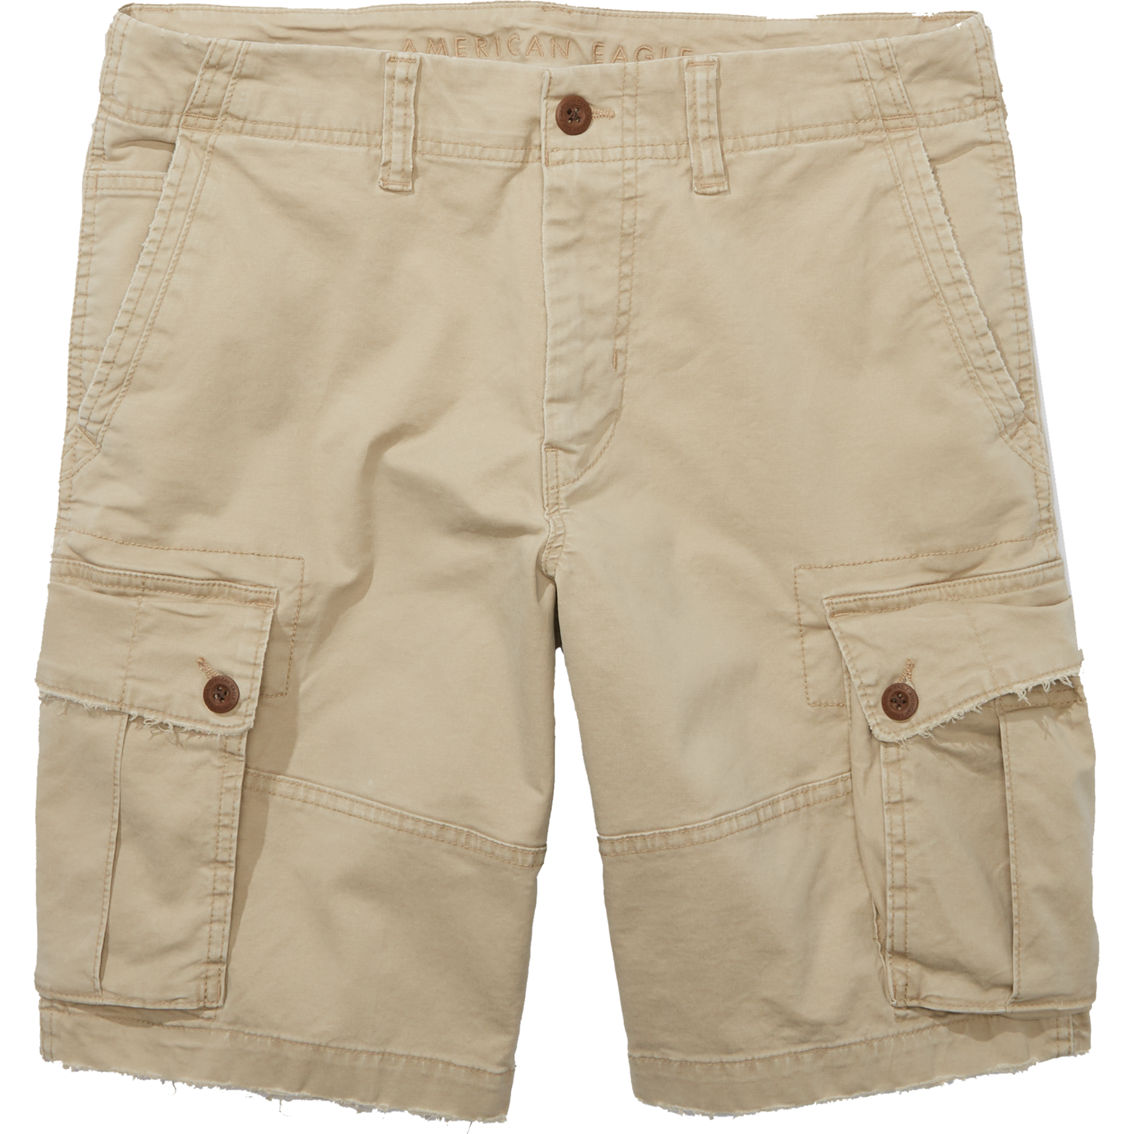 American Eagle Flex 10 in. Lived-In Cargo Shorts - Image 4 of 5